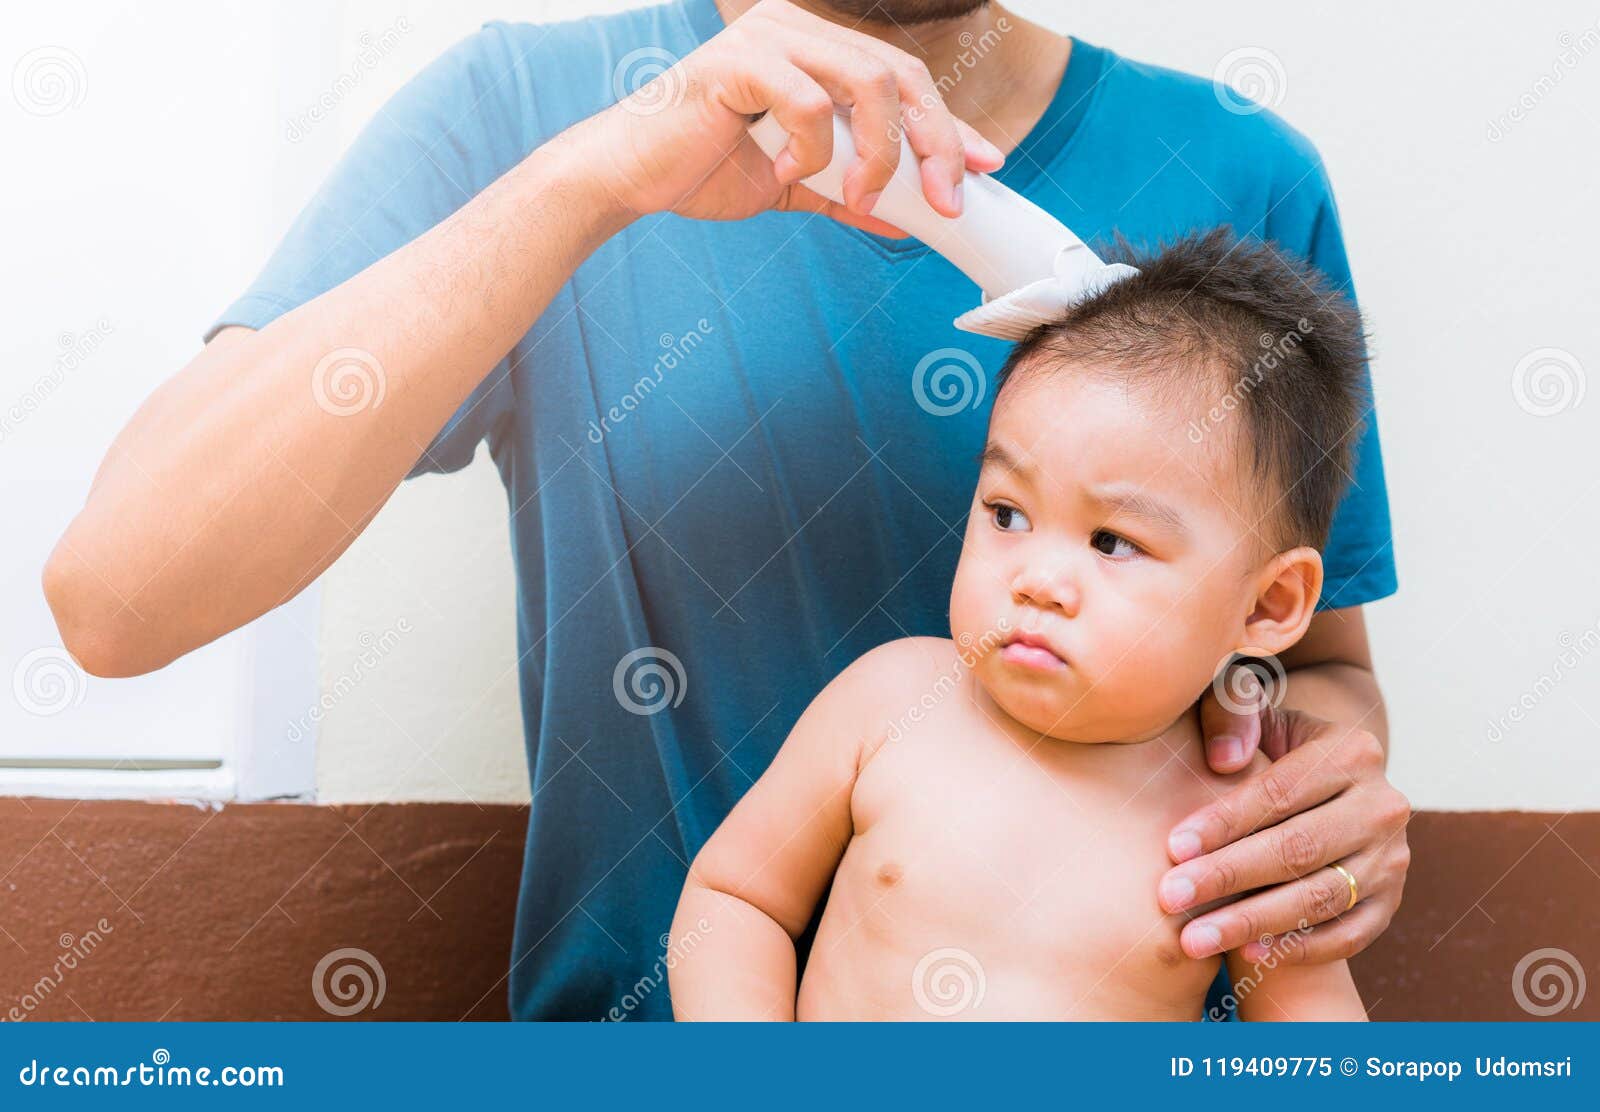 Baby Boy Haircut Hair Stock Image Image Of Care Face 119409775